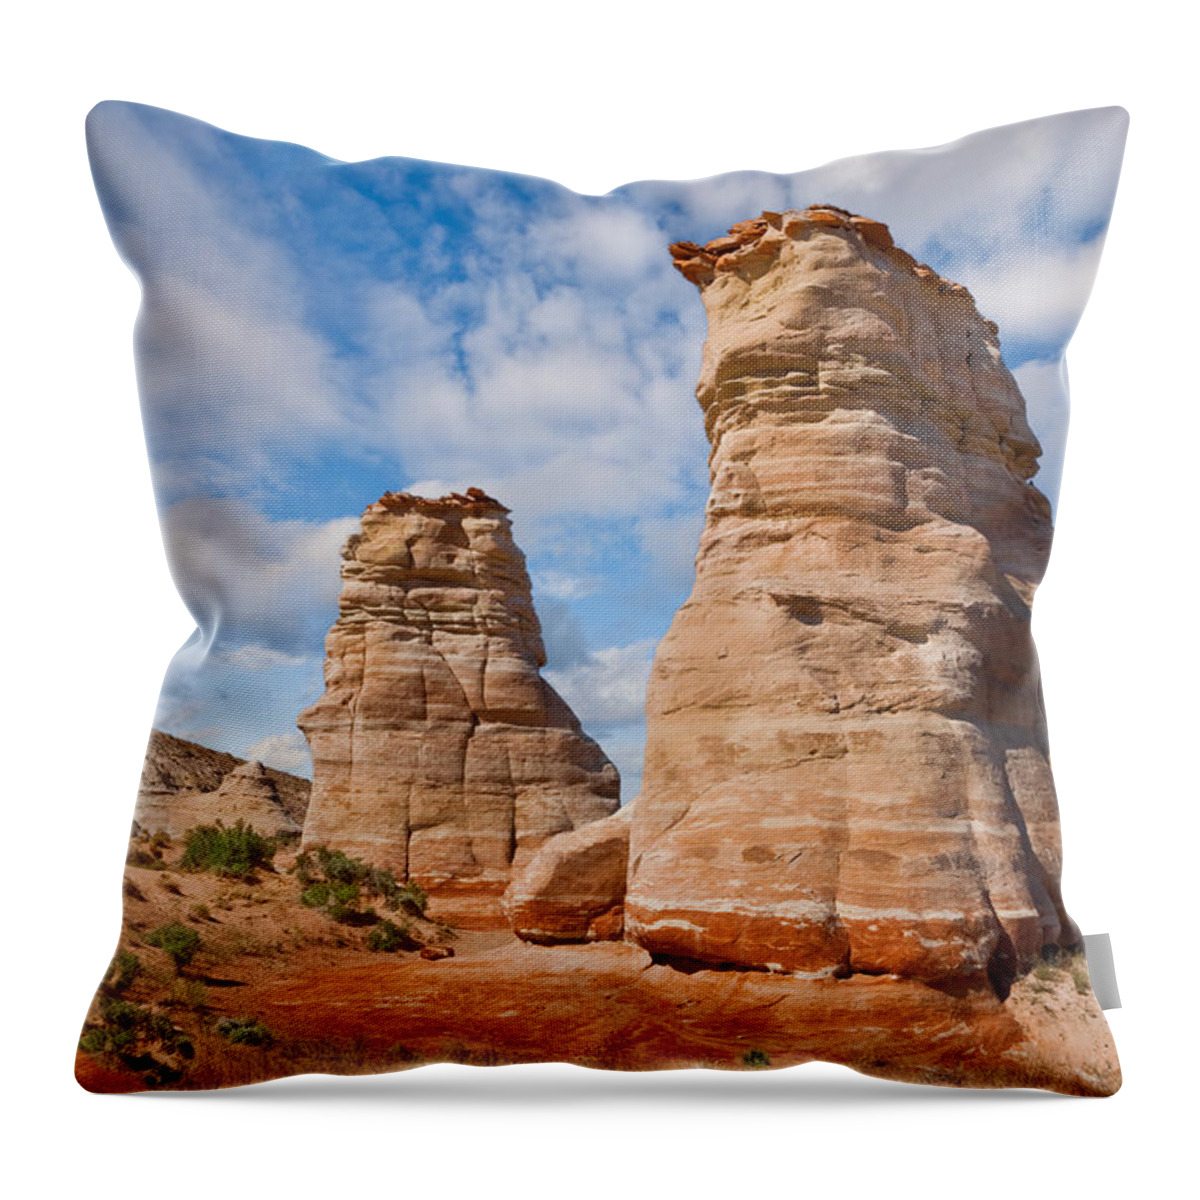 Arid Climate Throw Pillow featuring the photograph Elephant's Feet Rock Formation by Jeff Goulden